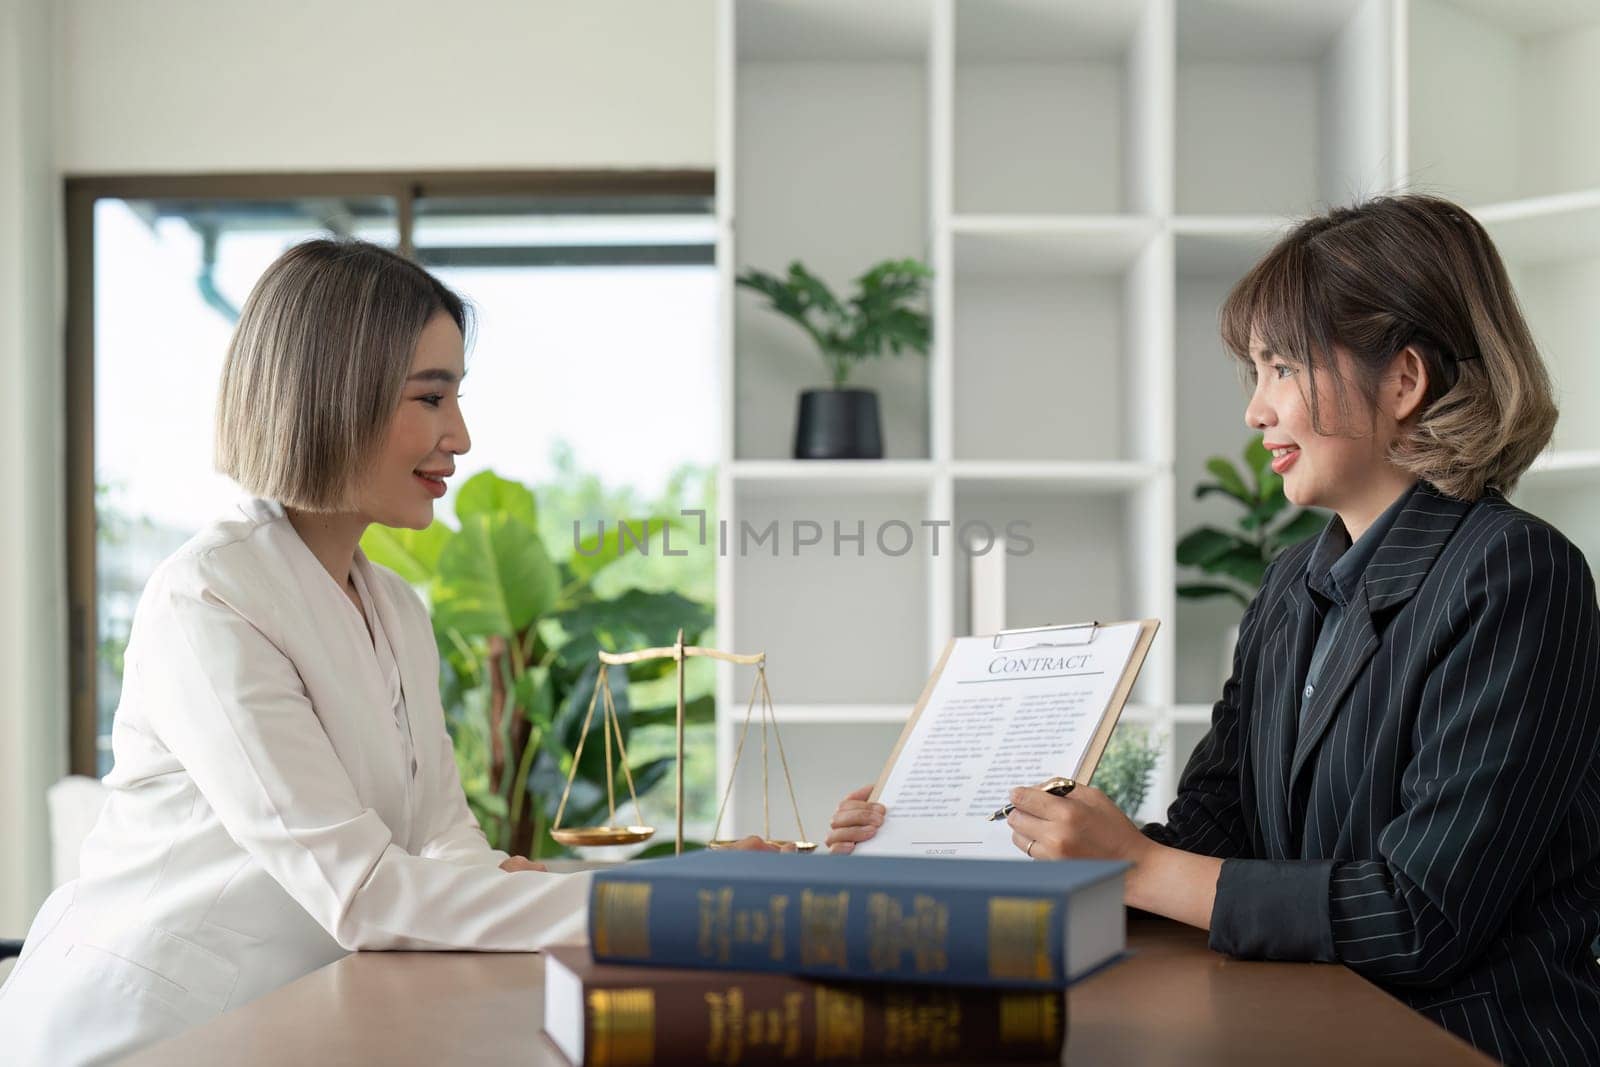 Company hired the lawyer office as a legal advisor and draft the contract so that the client could signs the right contract. Contract of sale was on the table in the lawyer office.